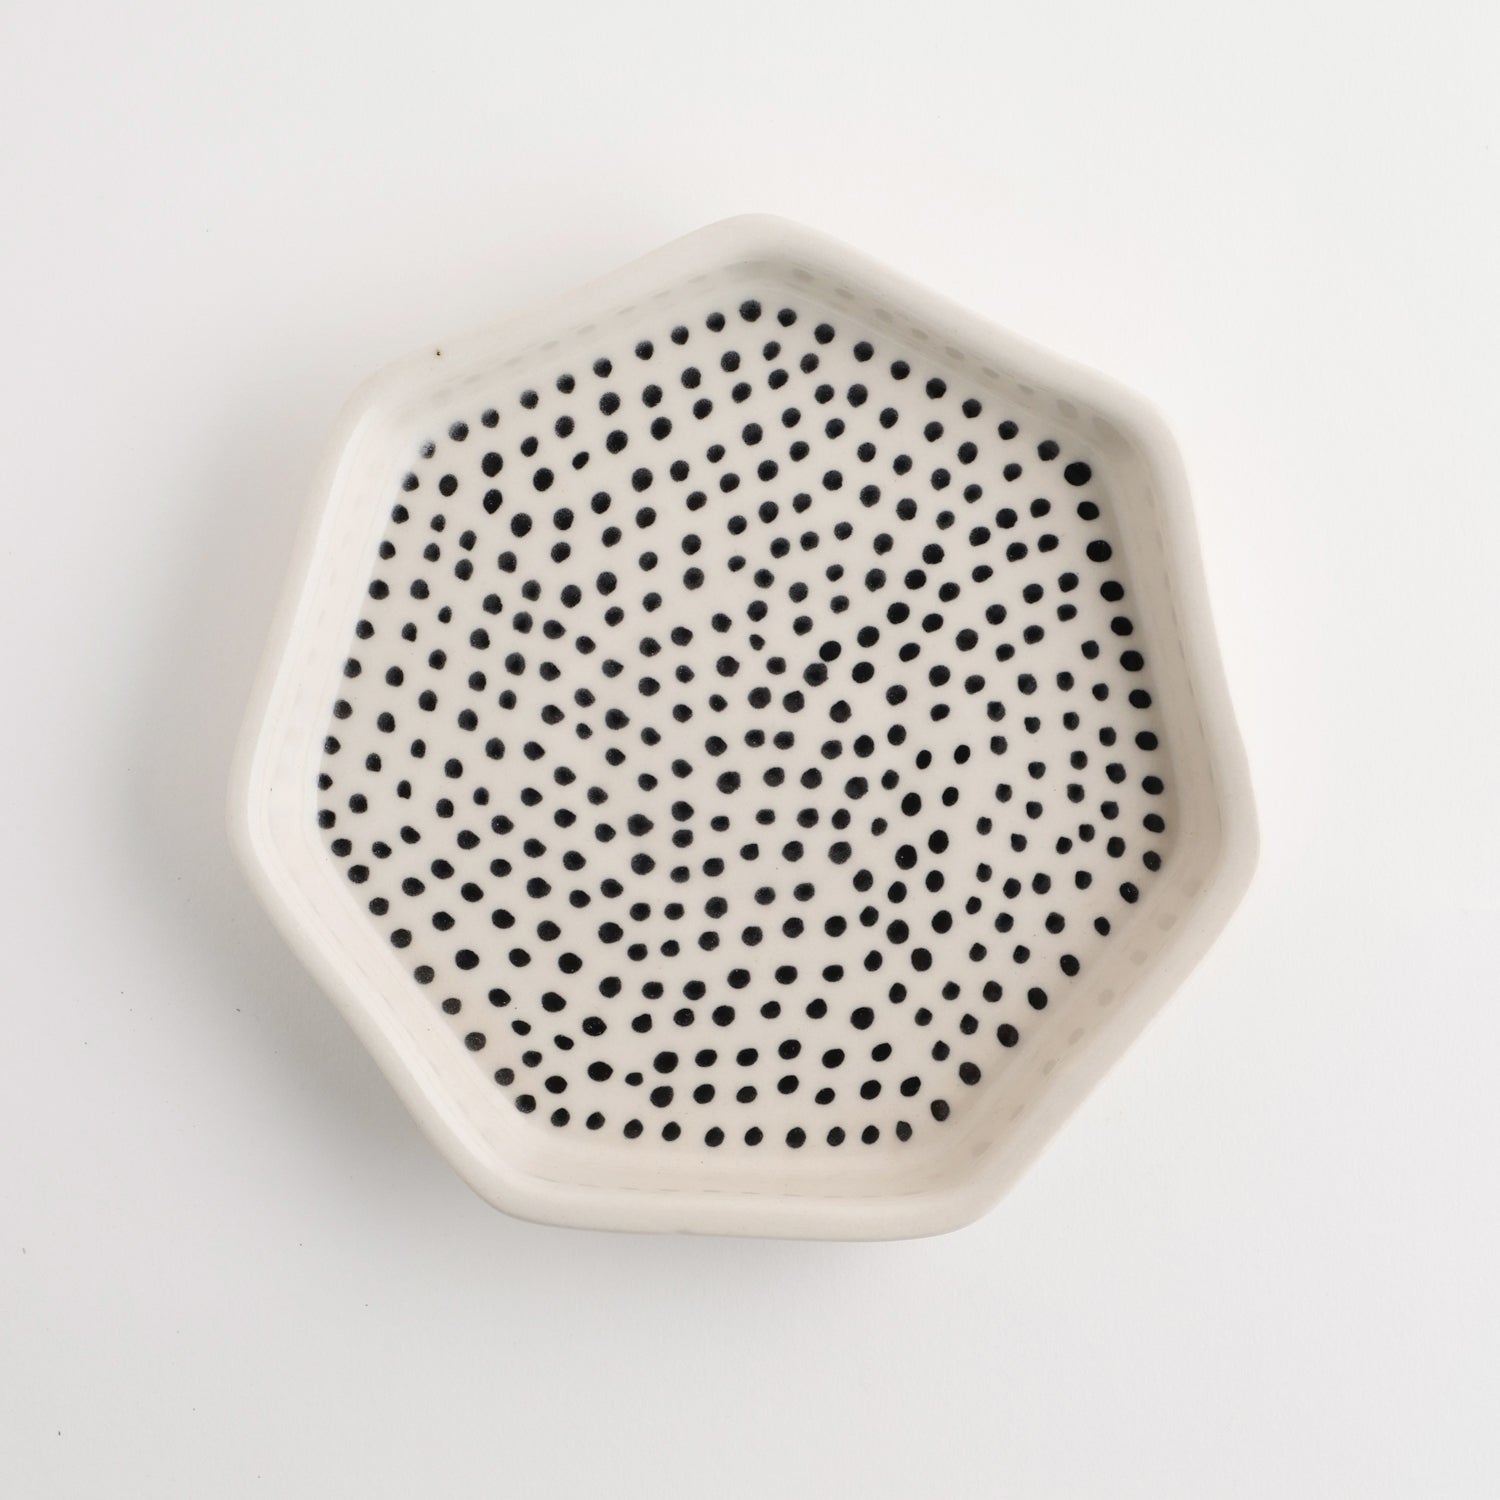 Ceramic Dotted Snack Plate - Septagon  6.5 x 1